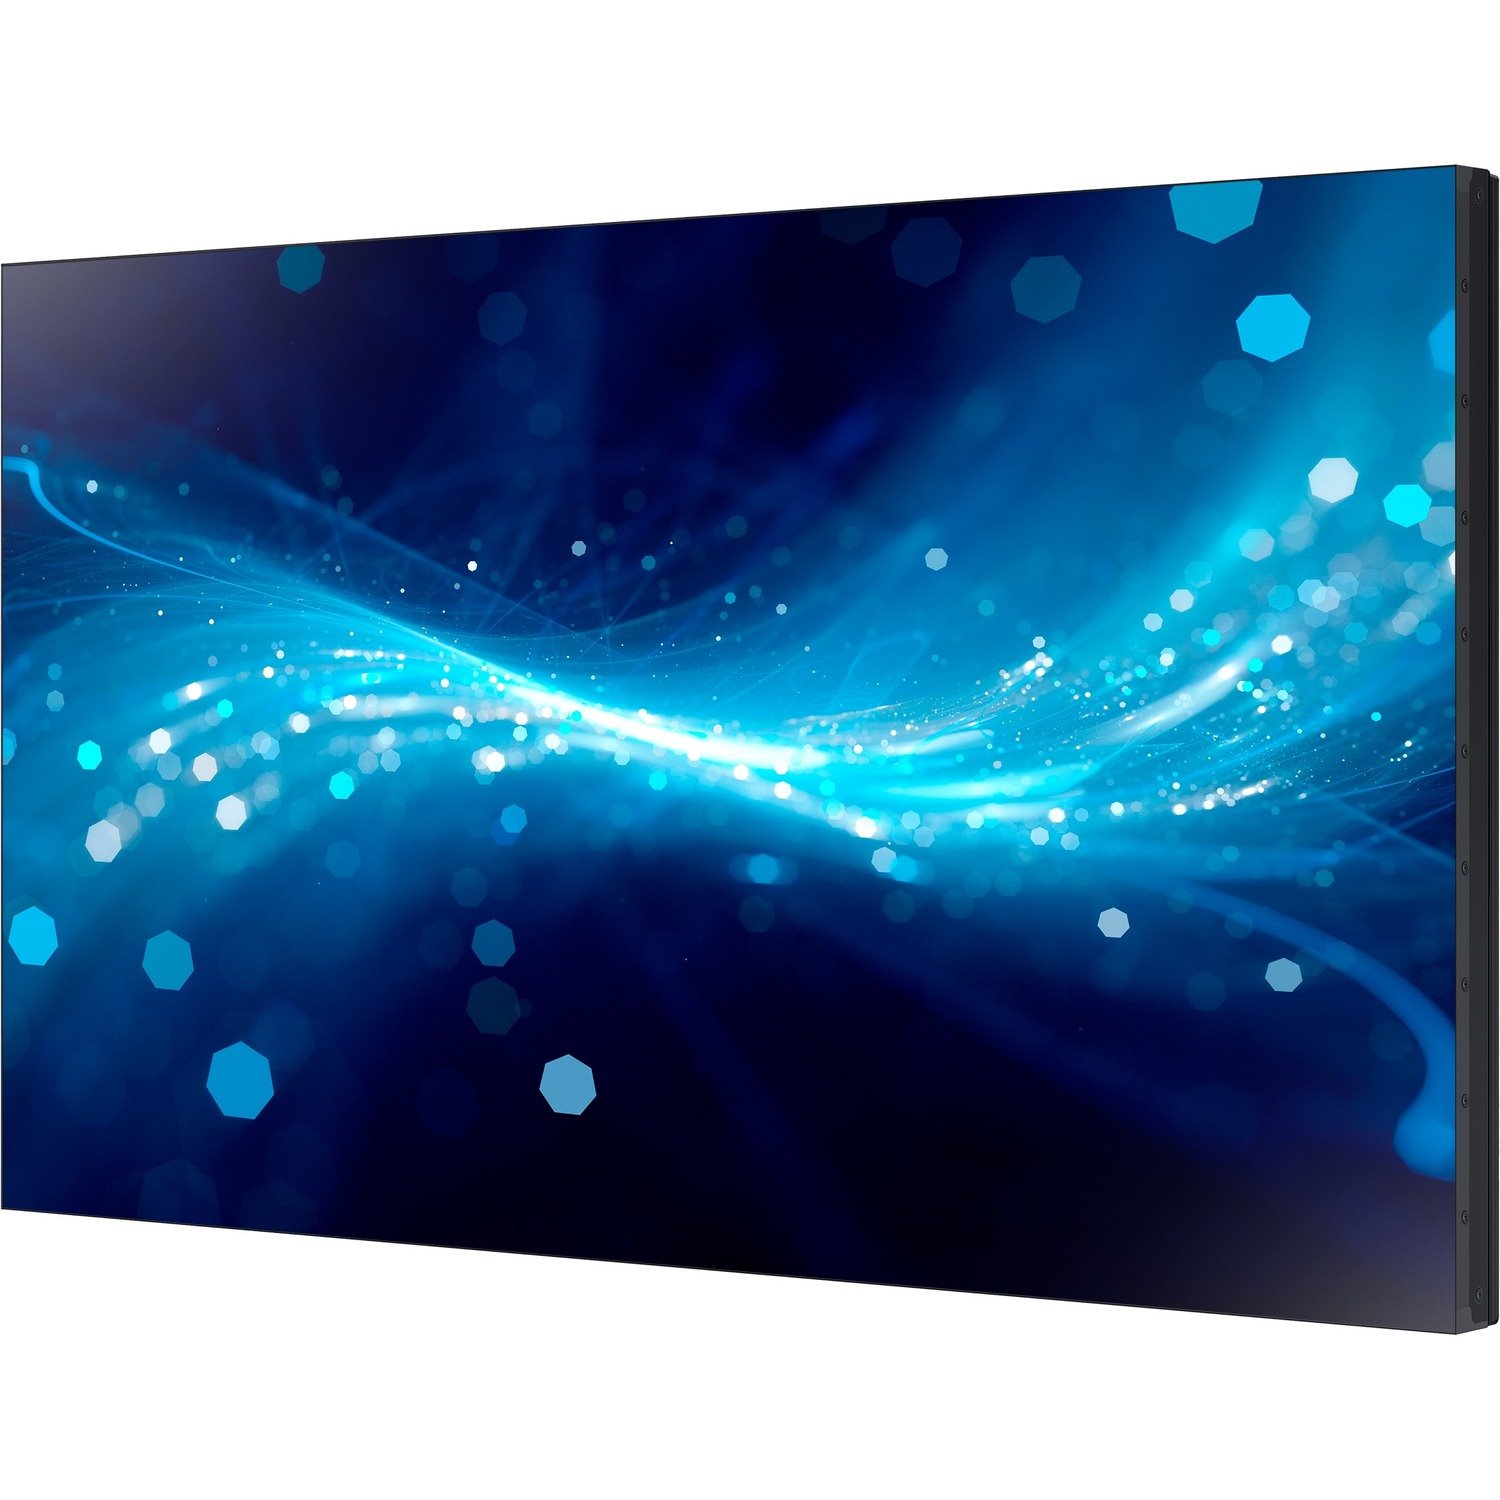 Samsung UH46N-E - Extreme Narrow Bezel Videowall Display for Business